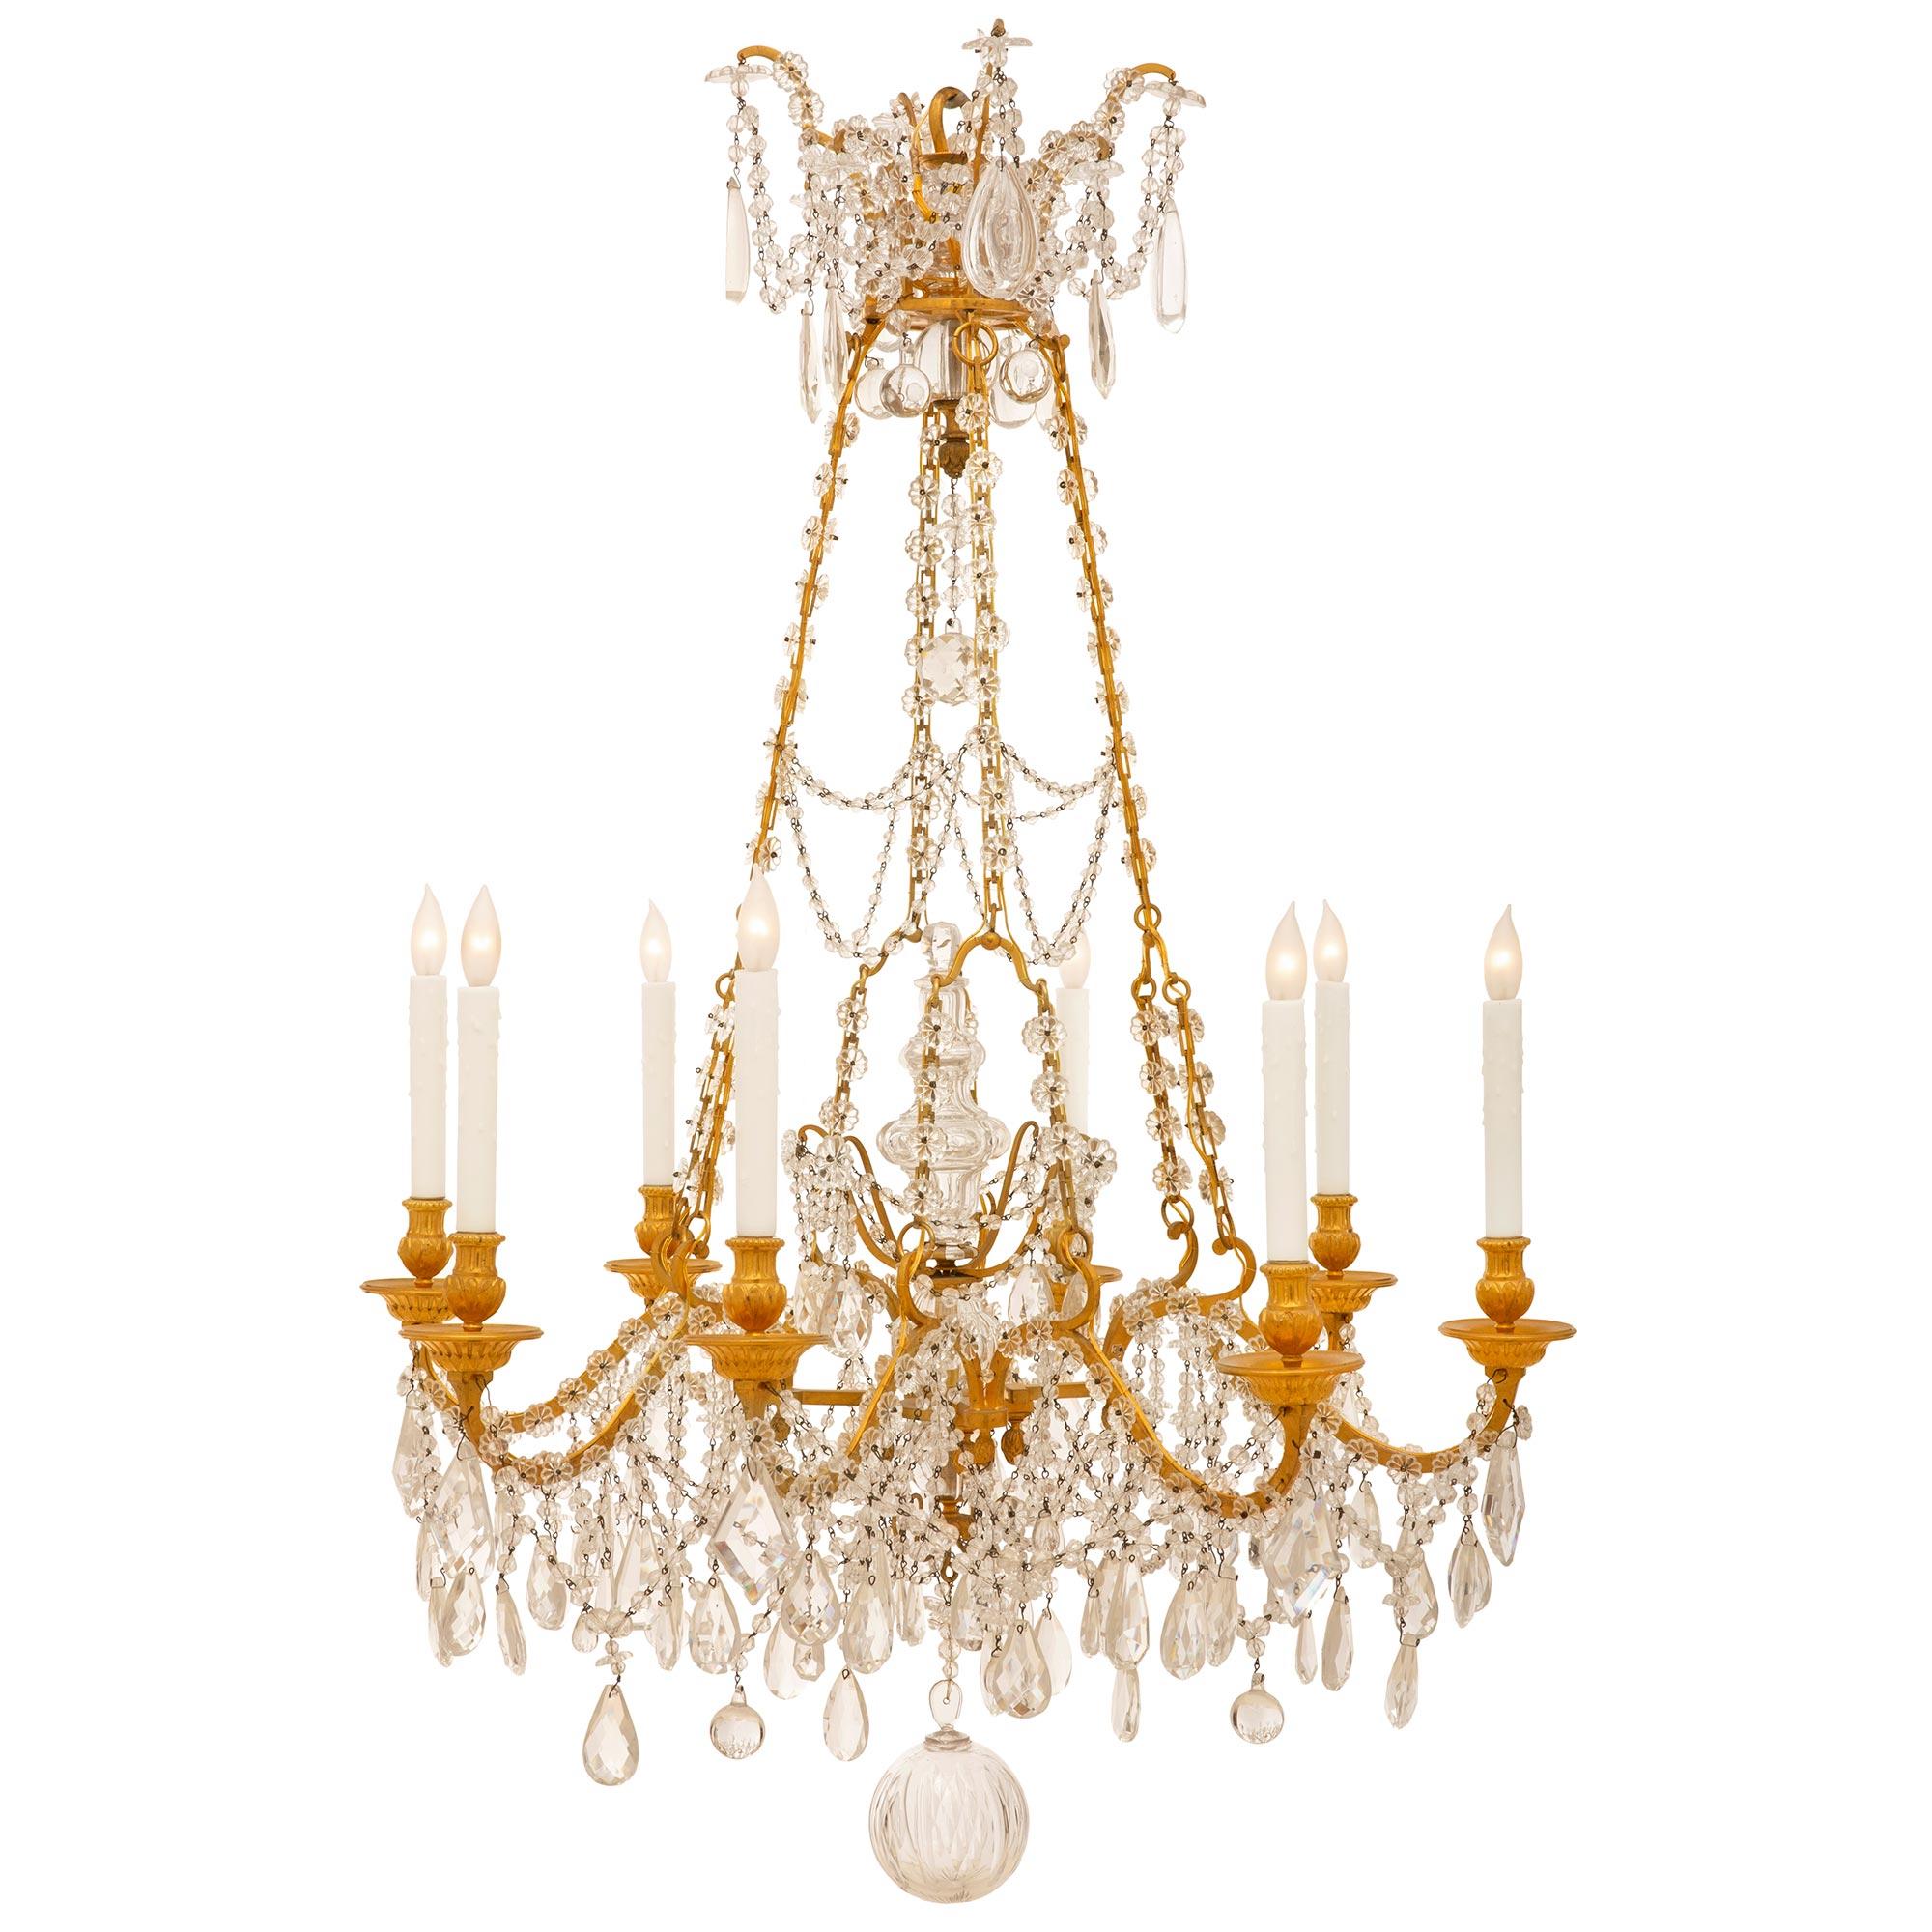 An outstanding and high quality mid 19th century French Louis XVI st. ormolu and Baccarat crystal eight light chandelier. The eight 'S' scrolled arms are heavily decorated by exquisite kite and water drop shaped crystals topped by rosettes and